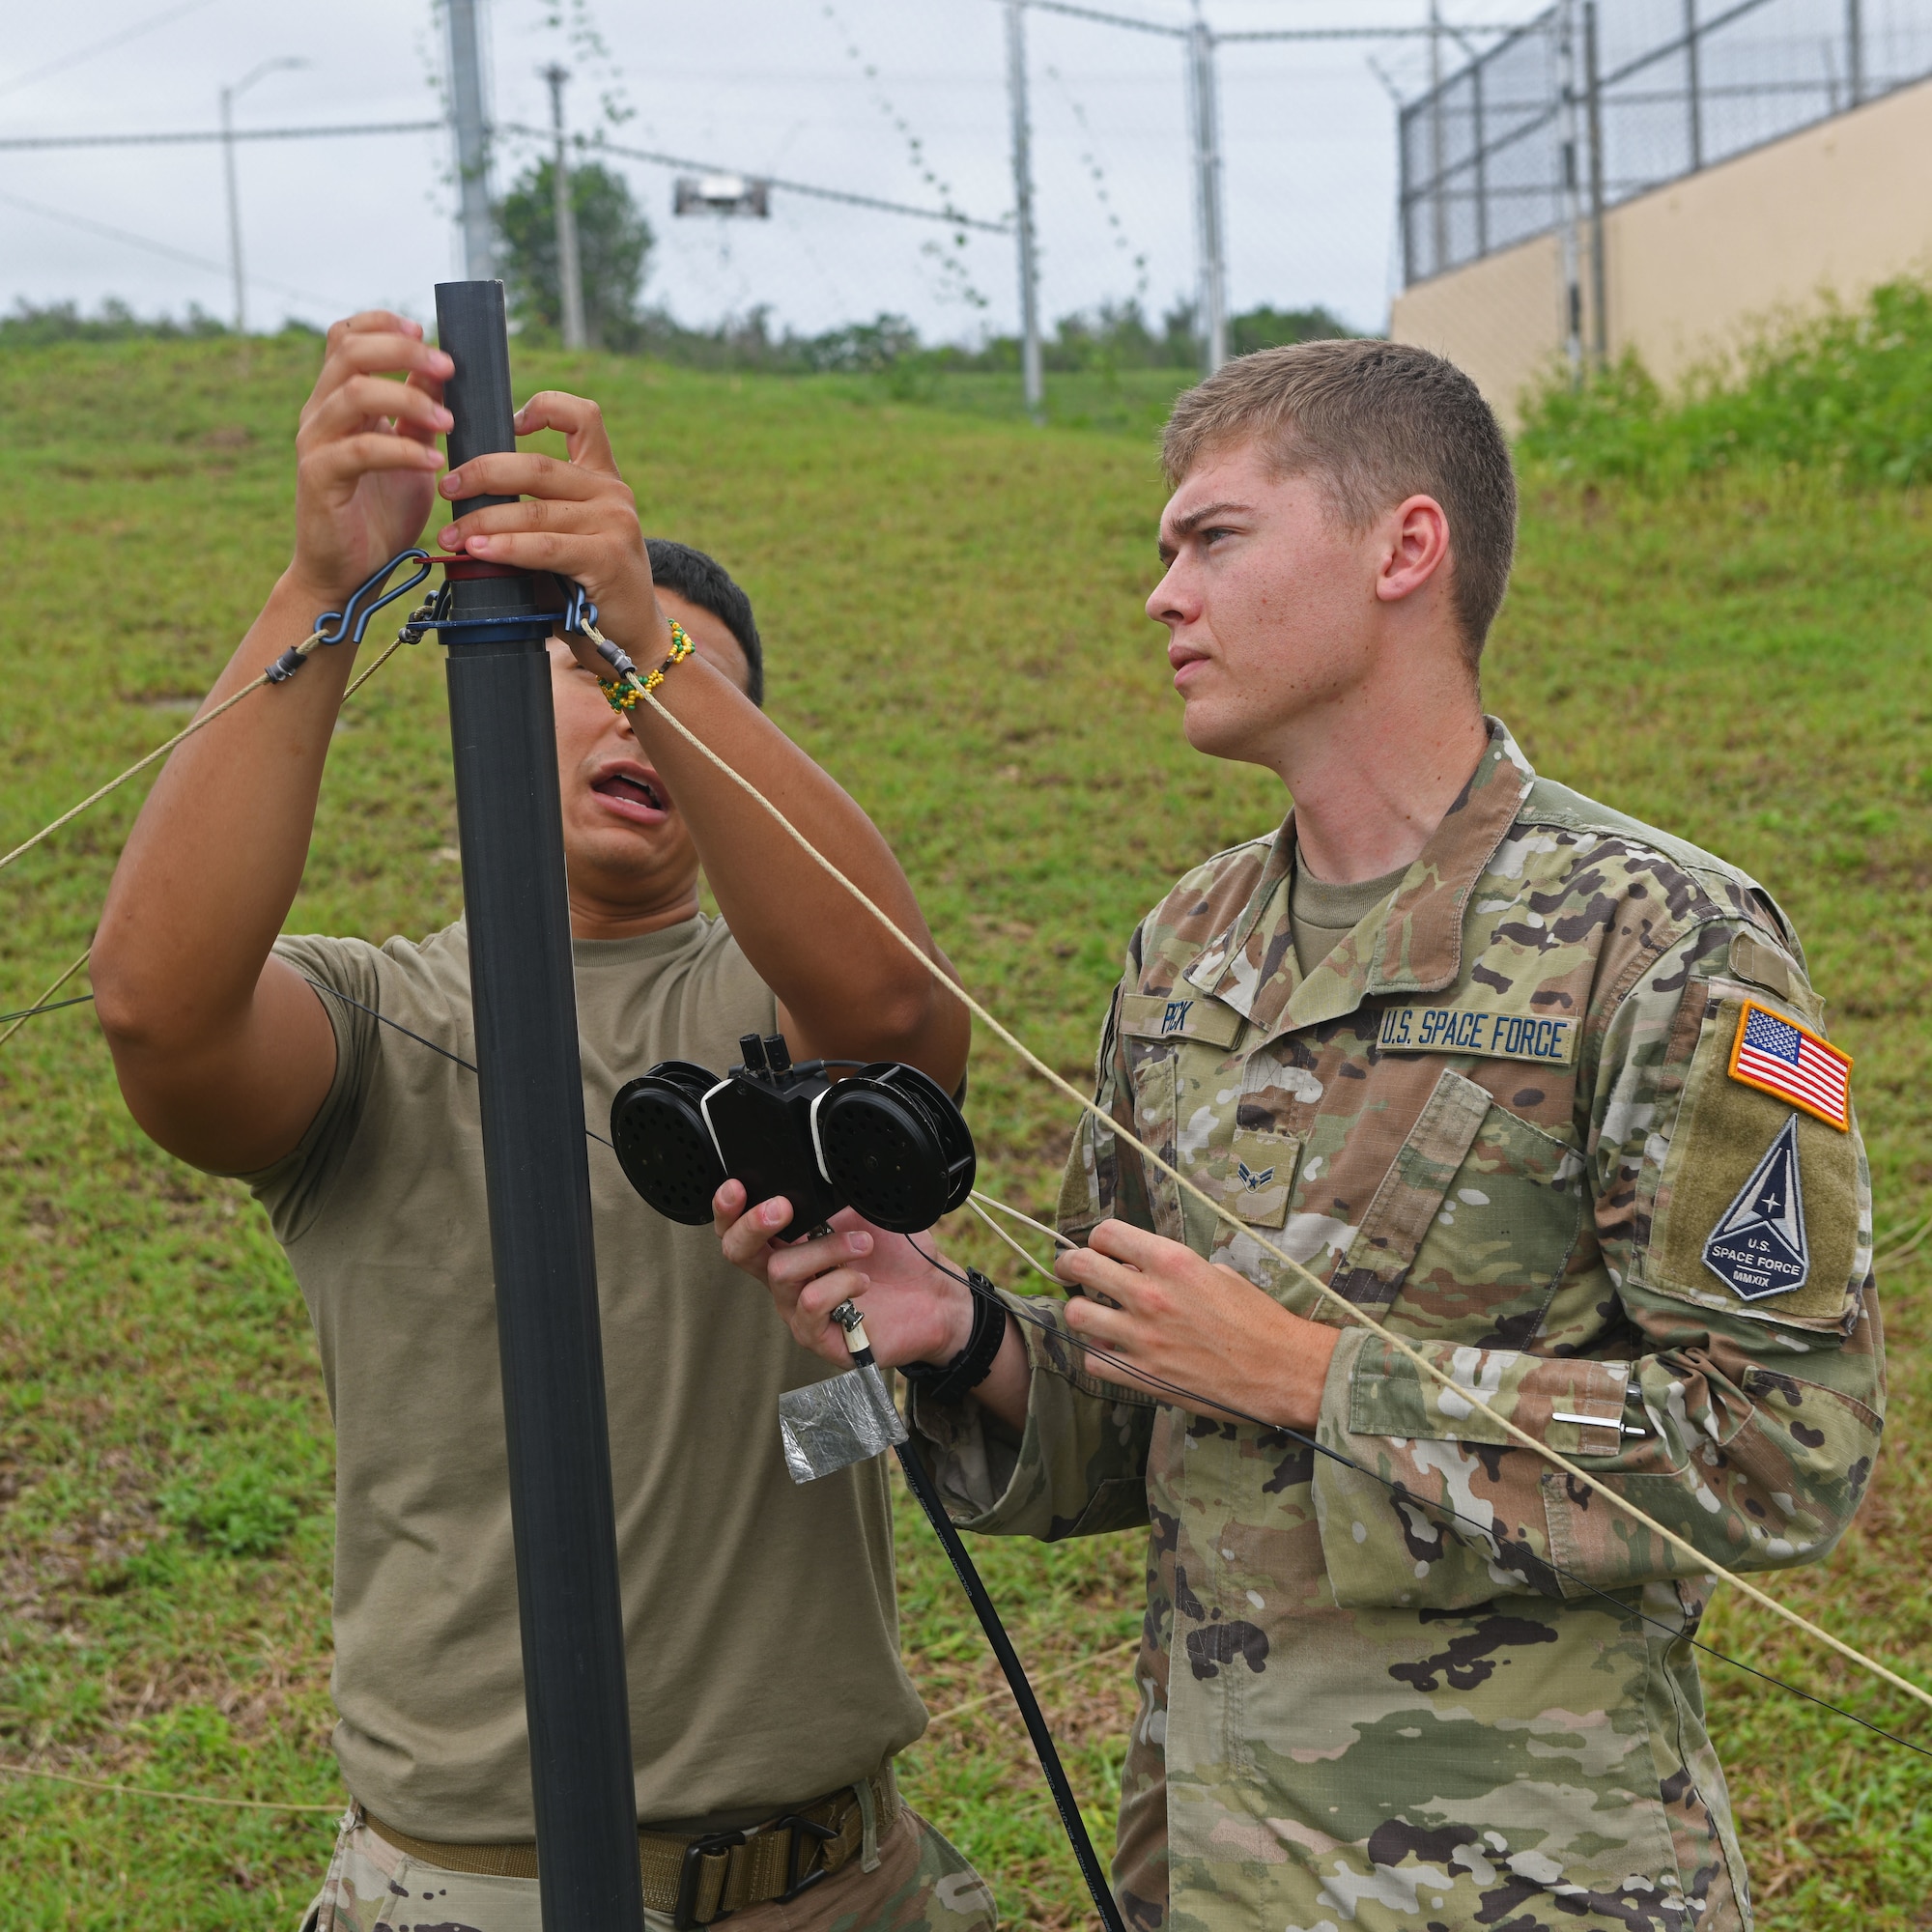 U.S. Air Force Airman 1st Class Brayan Rivera, 644th Combat Communications Squadron, deployed from Andersen Air Force Base, Guam, radio frequency transmissions systems administrator, and U.S. Space Force Specialist 3 Cameron Pack, 644th CBCS, cyber systems operations technician, set up an antenna at the Tinian International Airport, Tinian, during Pacific Iron 2021, Aug. 2, 2021. Pacific Iron 2021 is a Pacific Air Forces dynamic force employment operation to project forces into USINDOPACOM’s area of responsibility in support of the 2018 National Defense Strategy which called on the military to be a more lethal, adaptive, and resilient force. (U.S. Air Force photo by Tech. Sgt. Benjamin Sutton)